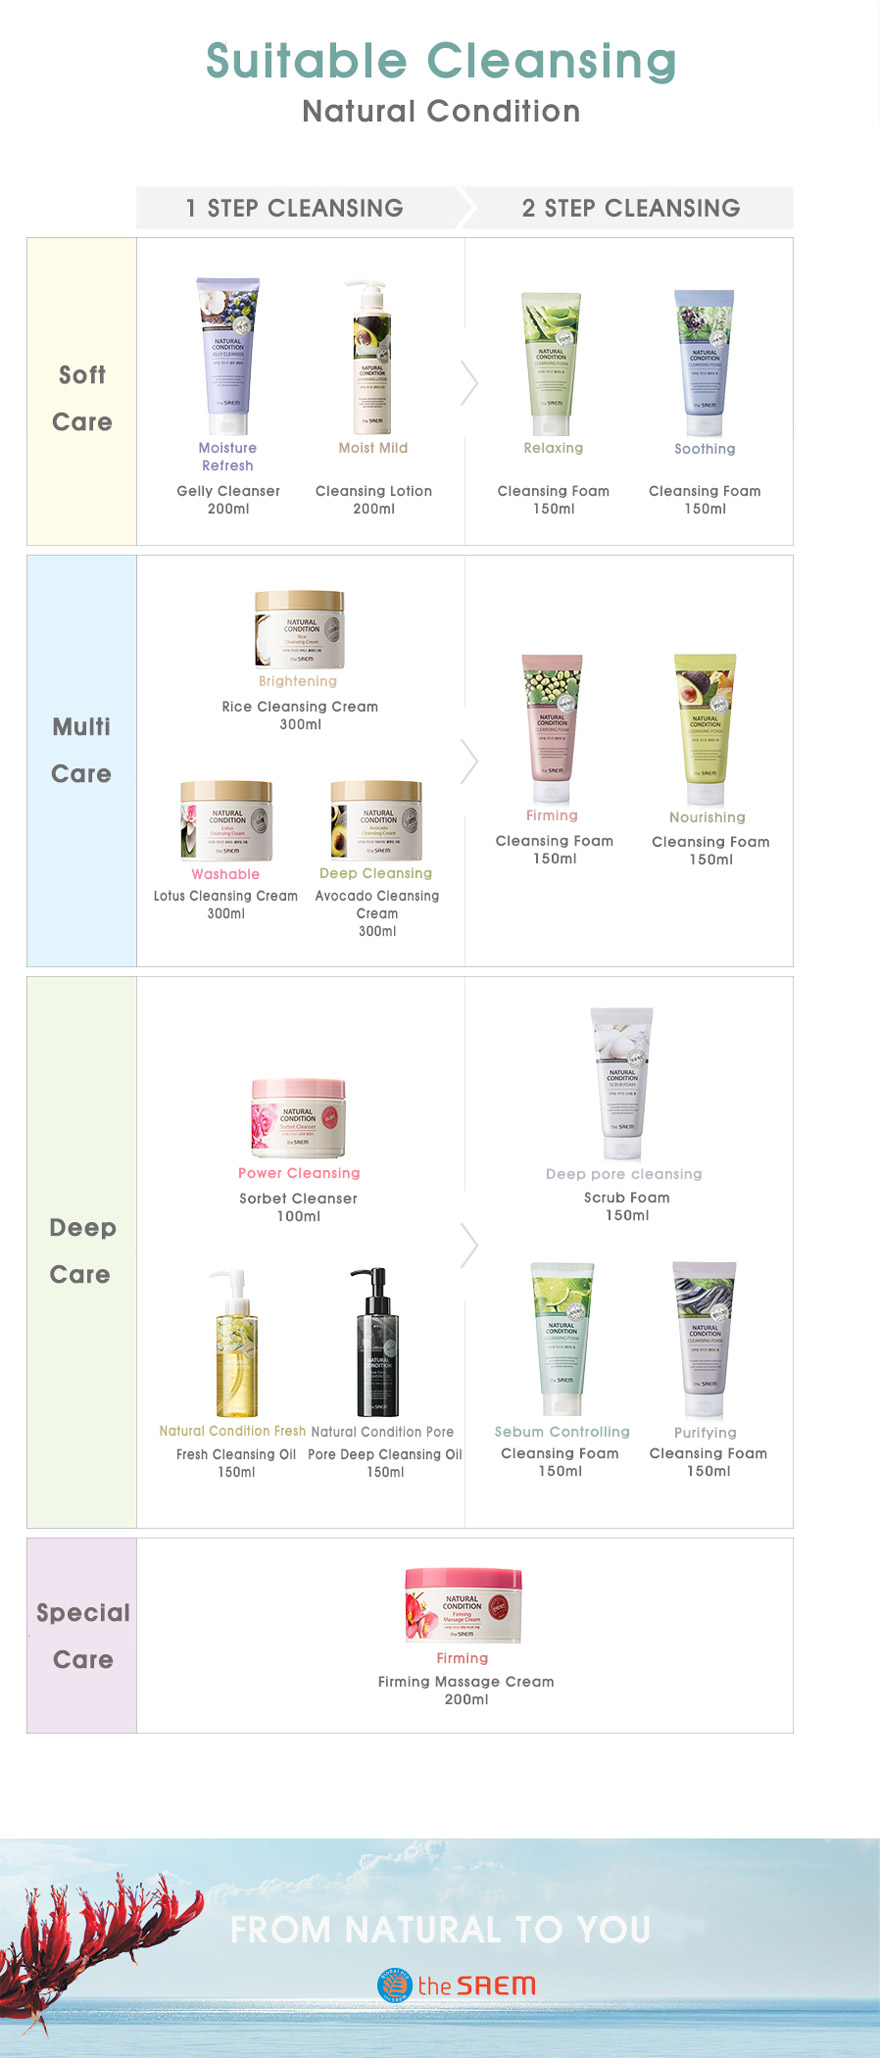 [The saem] Natural Condition Cleansing Foam #Relaxing 150ml